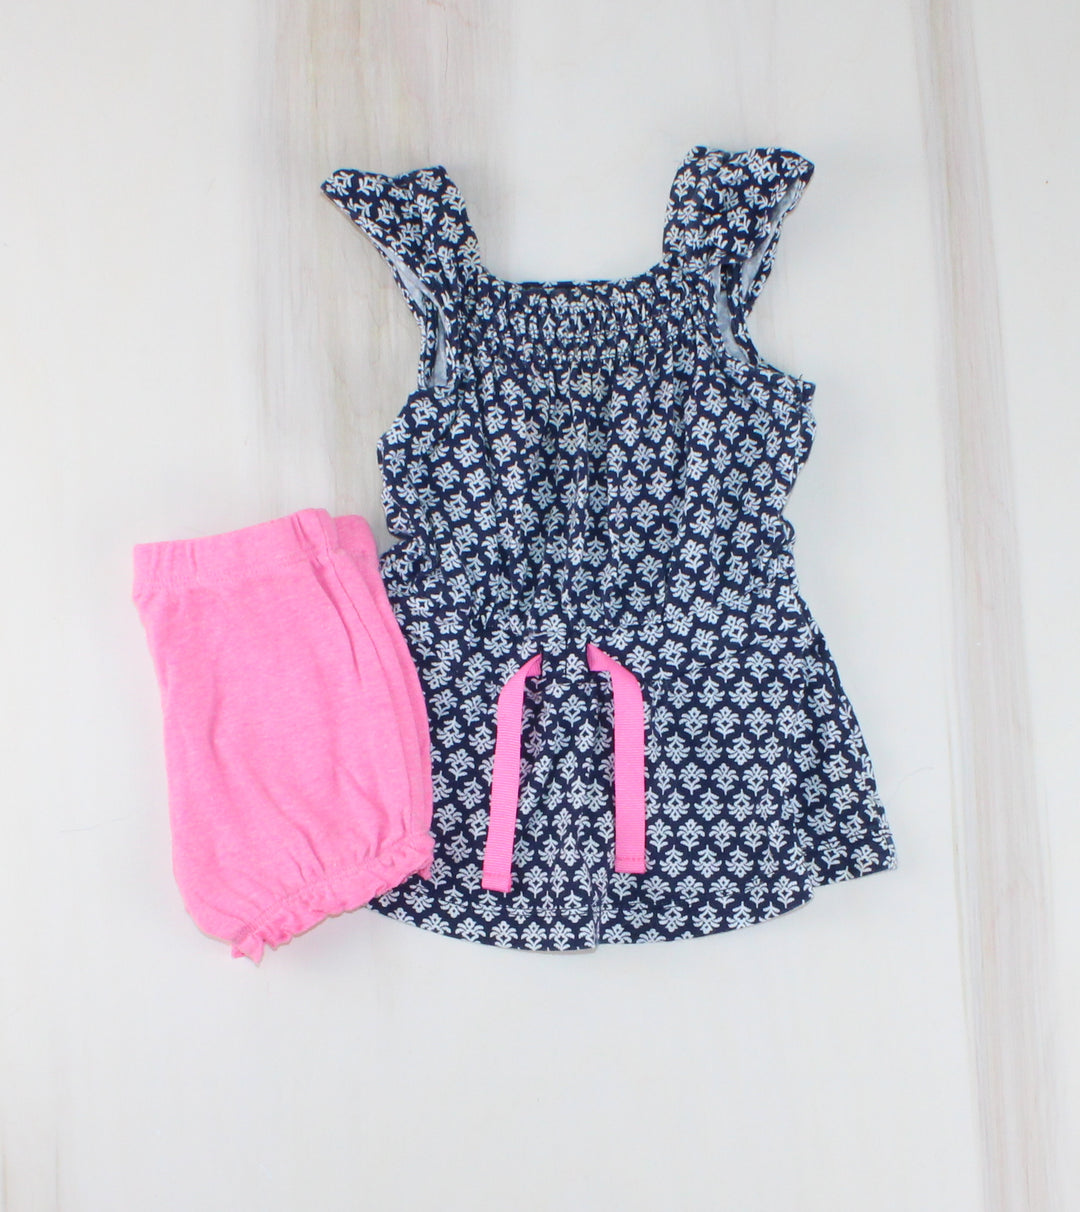 CARTERS NAVY & PINK OUTFIT 12M EUC